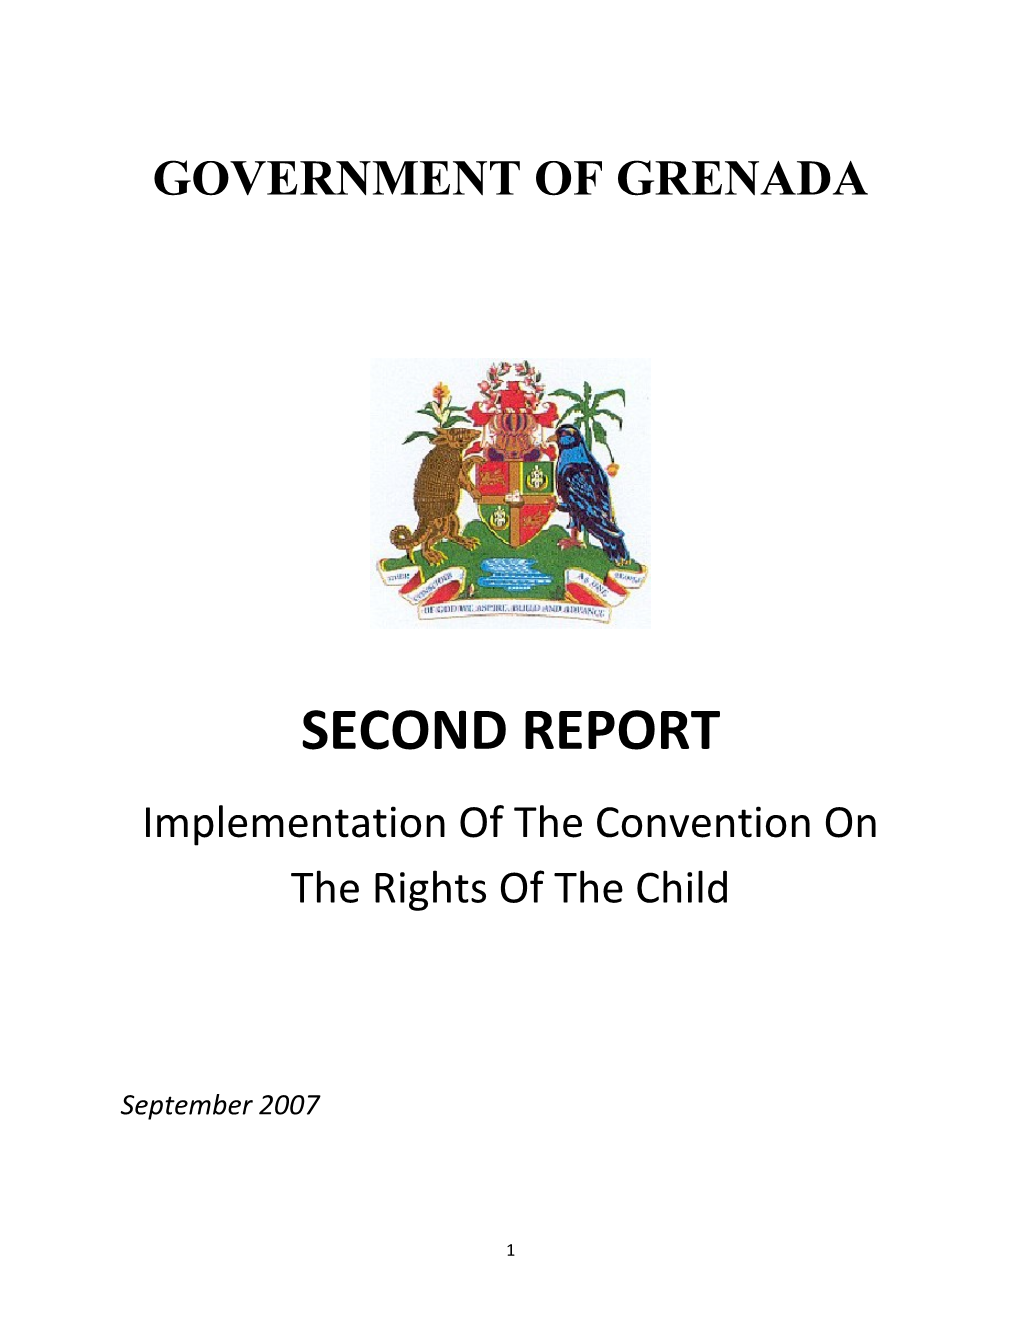 The Following Is the Progress Report of the State of Grenada, Which Also Highlights Its